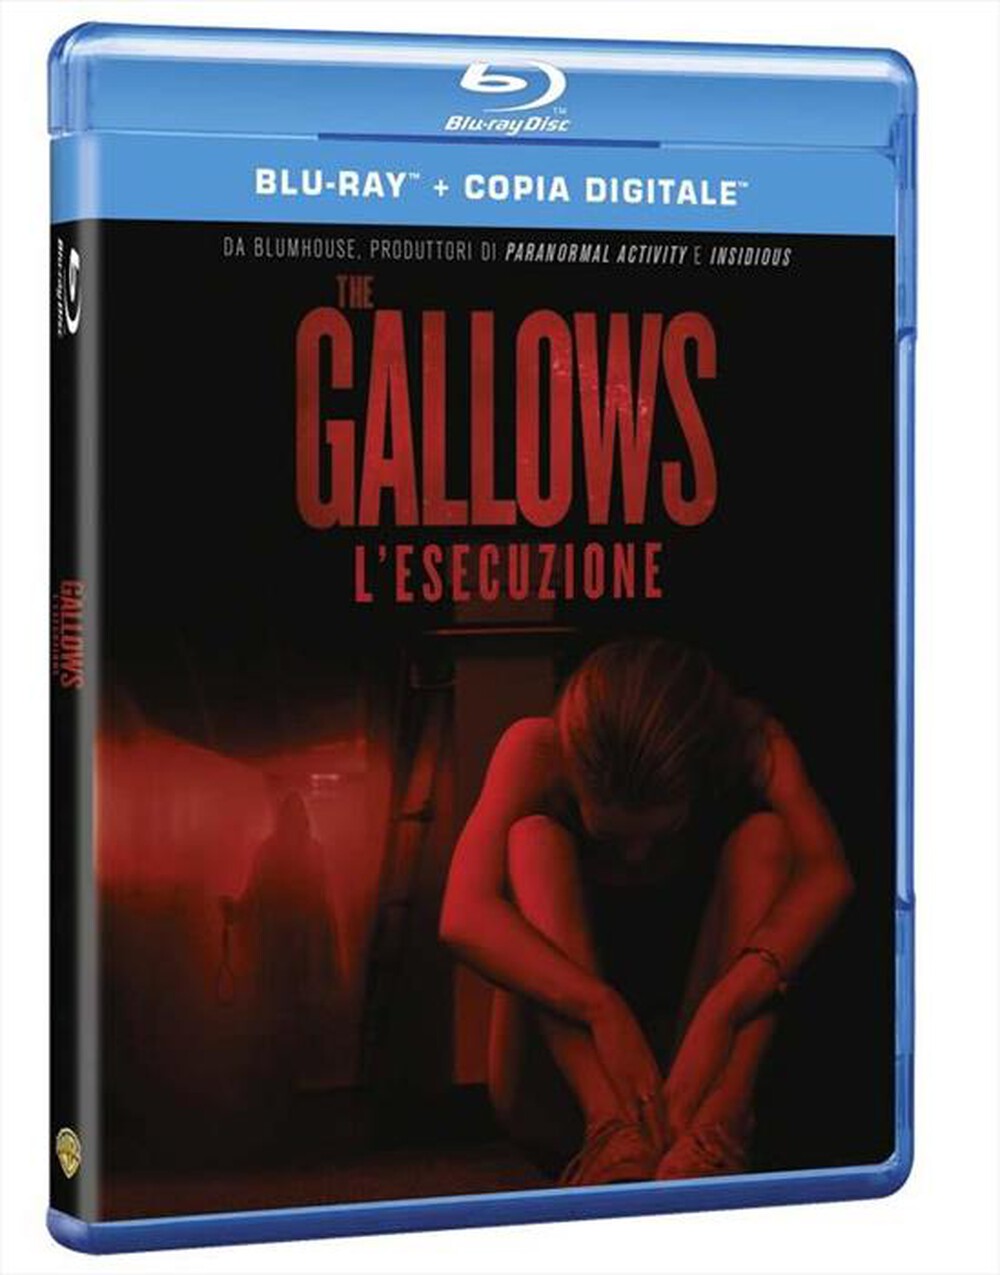 "WARNER HOME VIDEO - Gallows (The) - L'Esecuzione"